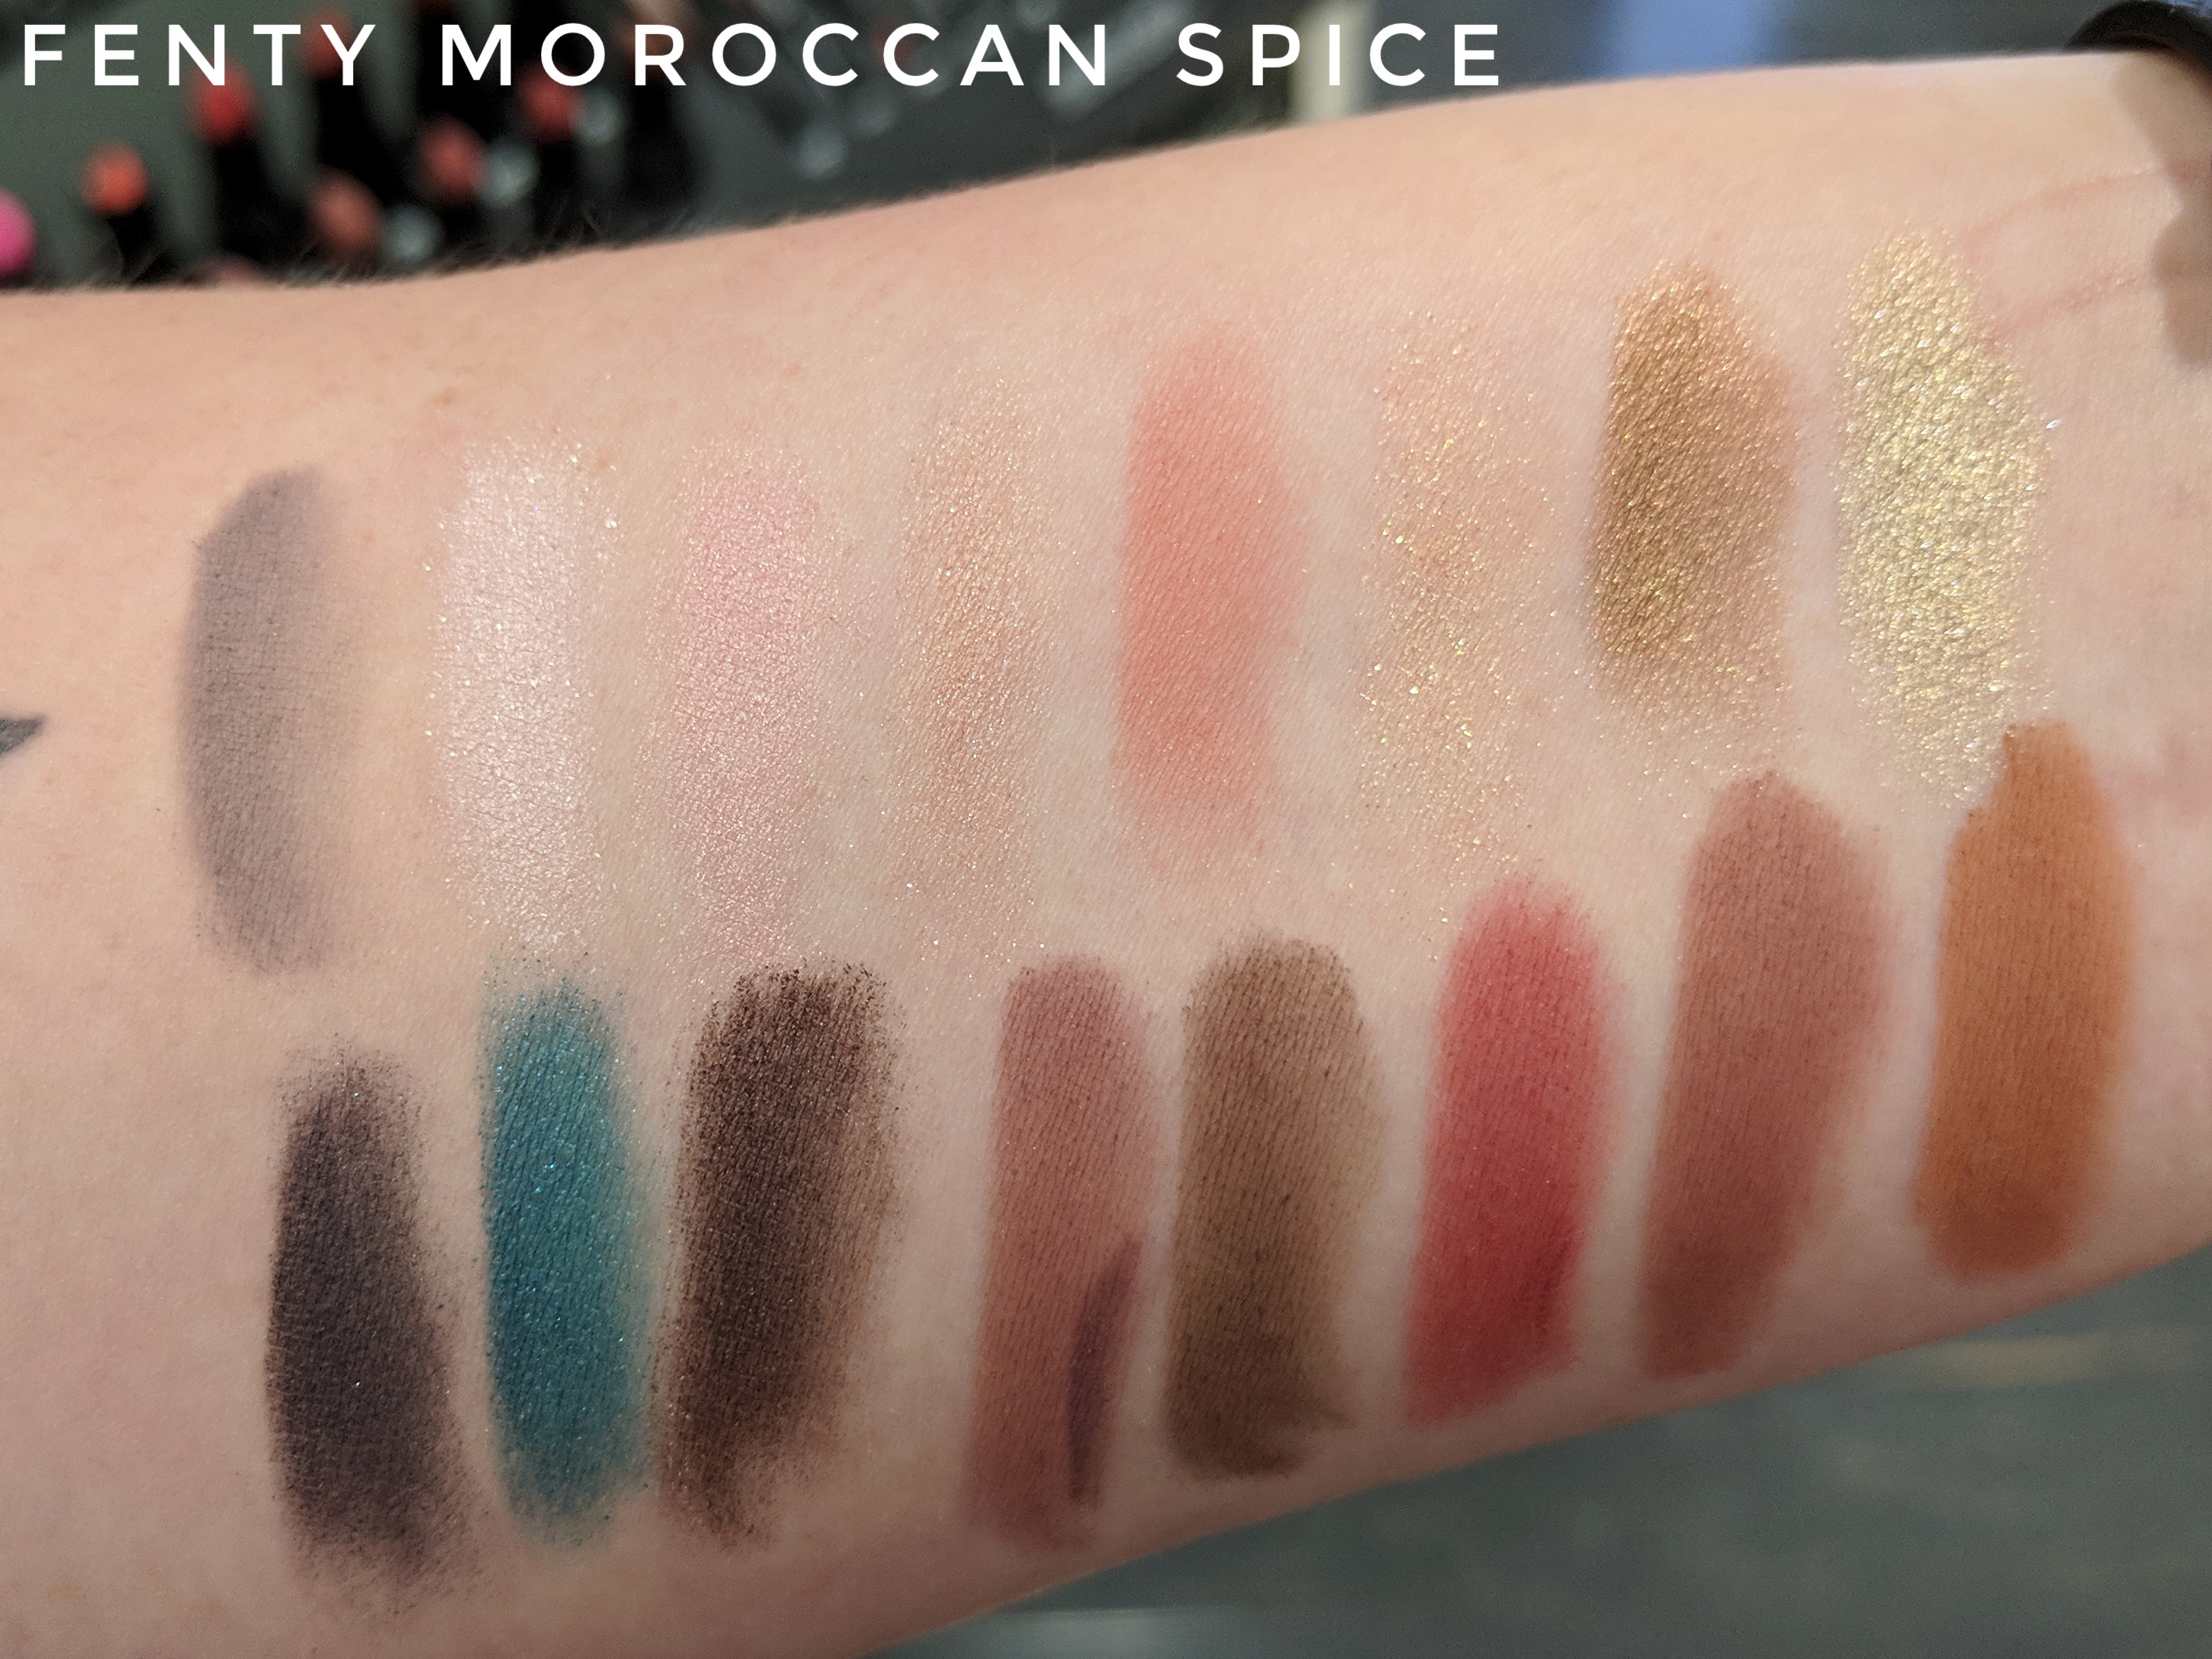 Fenty Beauty Moroccan Spice Swatches